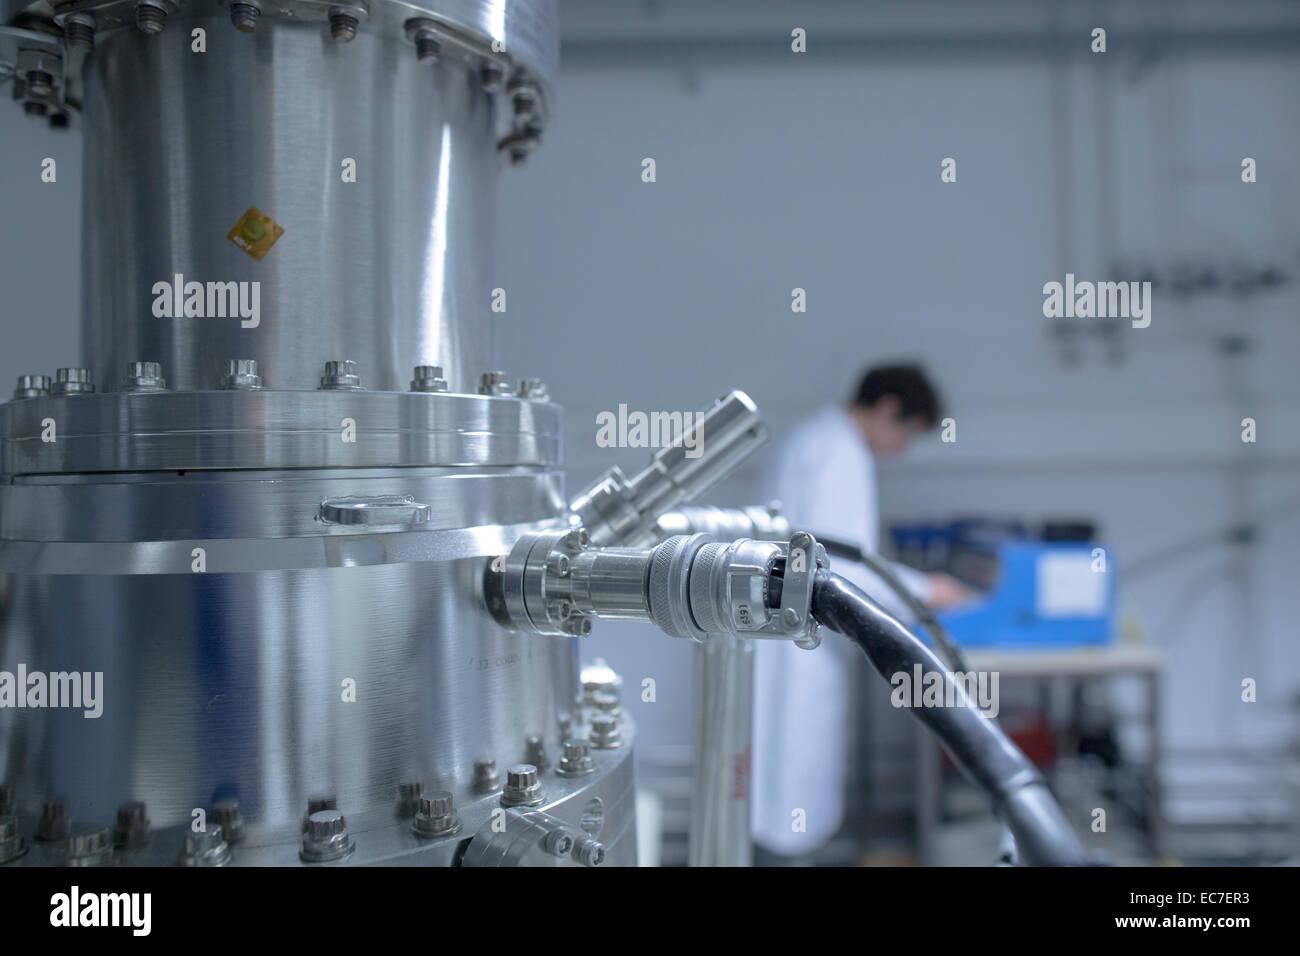 Spectrometer in a technical lab Stock Photo